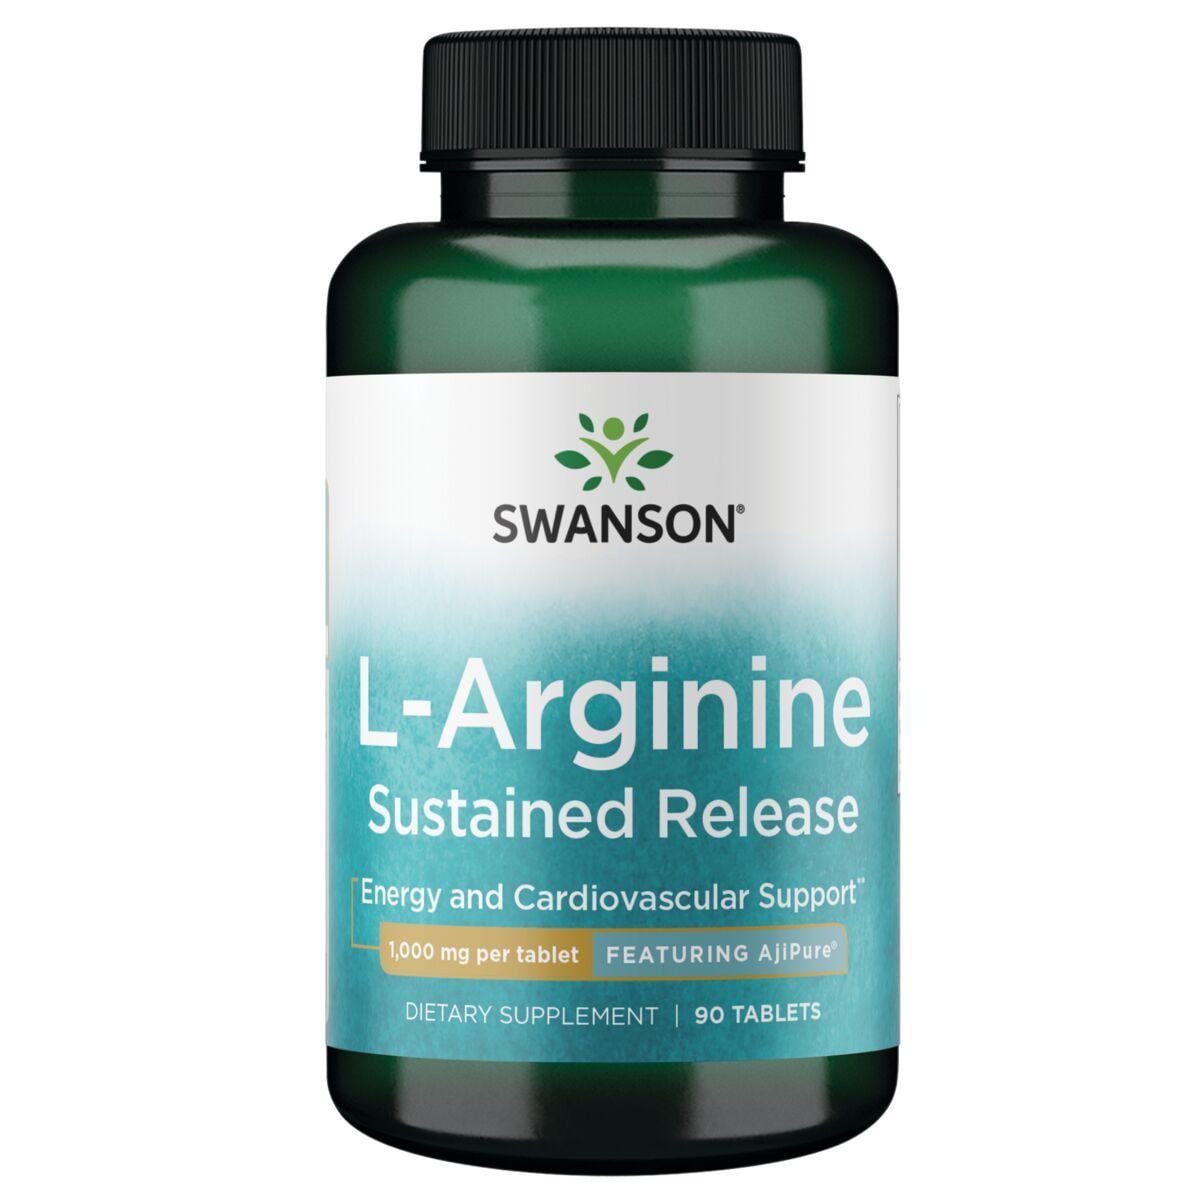 Swanson Ultra L-Arginine Sustained Release - Featuring Ajipure Supplement Vitamin | 1000 mg | 90 Tabs